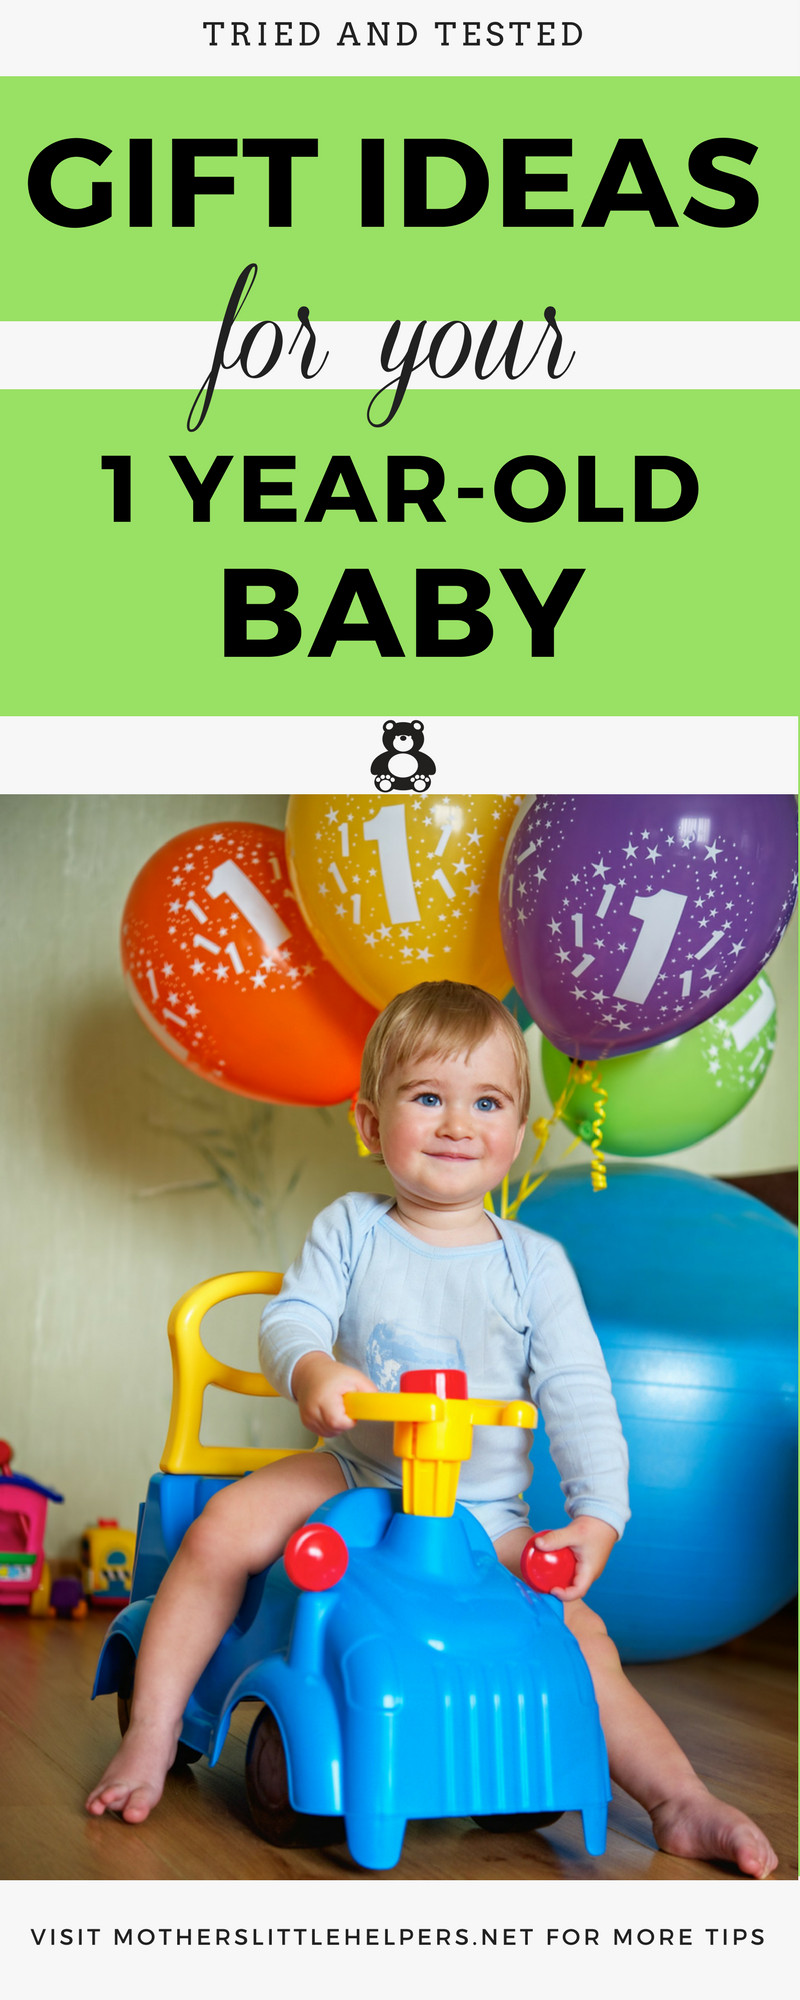 Baby Gifts 1 Year Old
 Best Gift for e Year Old Baby Gift Guide 2019